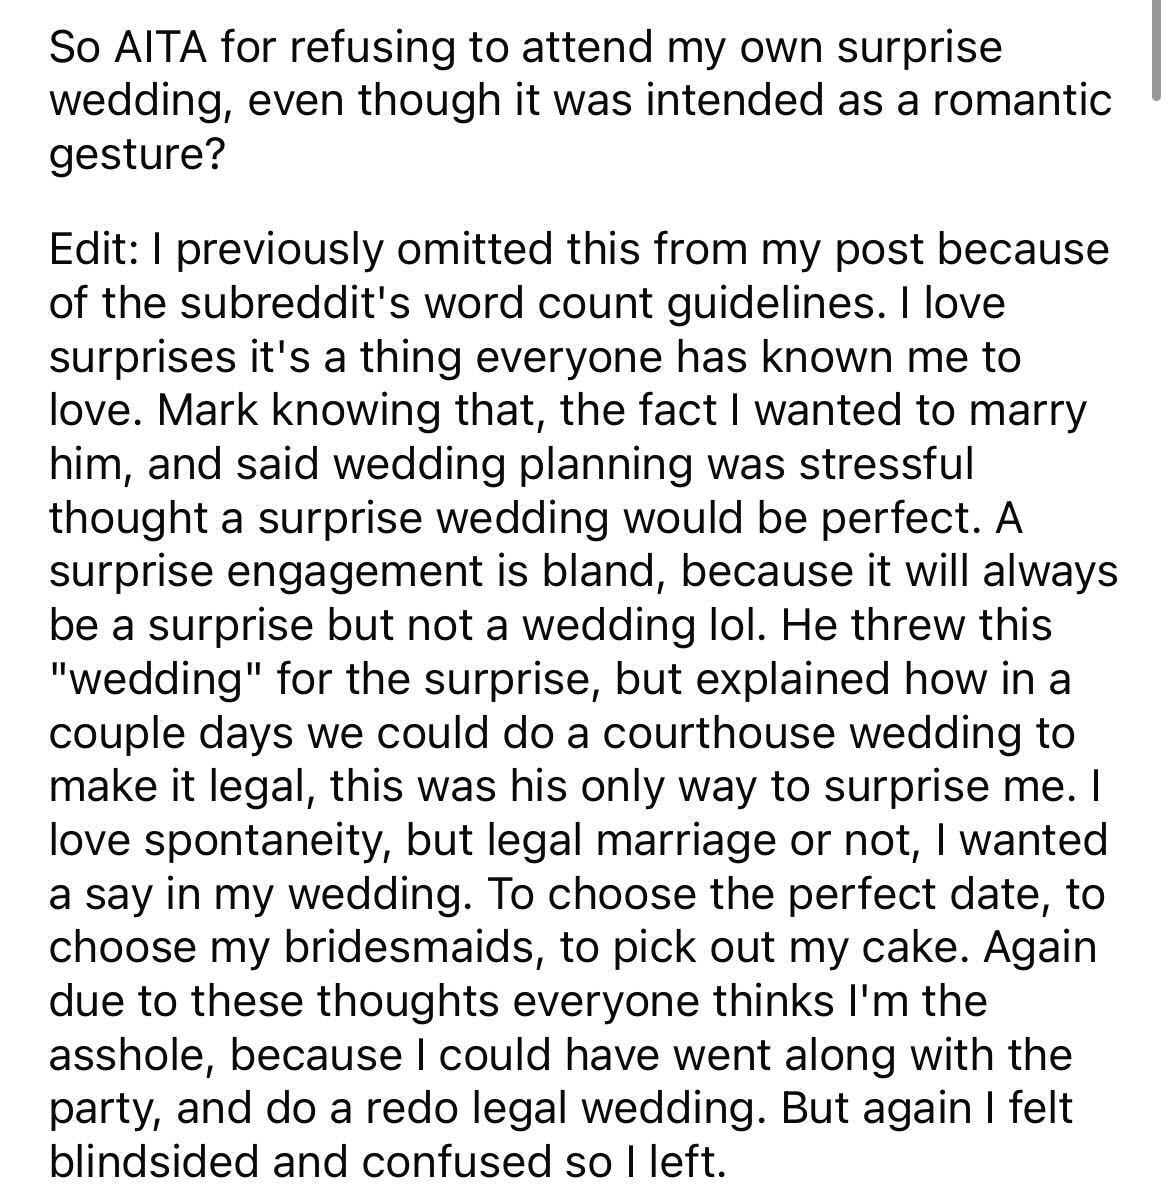 am i the asshole thread on reddit - document - So Aita for refusing to attend my own surprise wedding, even though it was intended as a romantic gesture? Edit I previously omitted this from my post because of the subreddit's word count guidelines. I love 